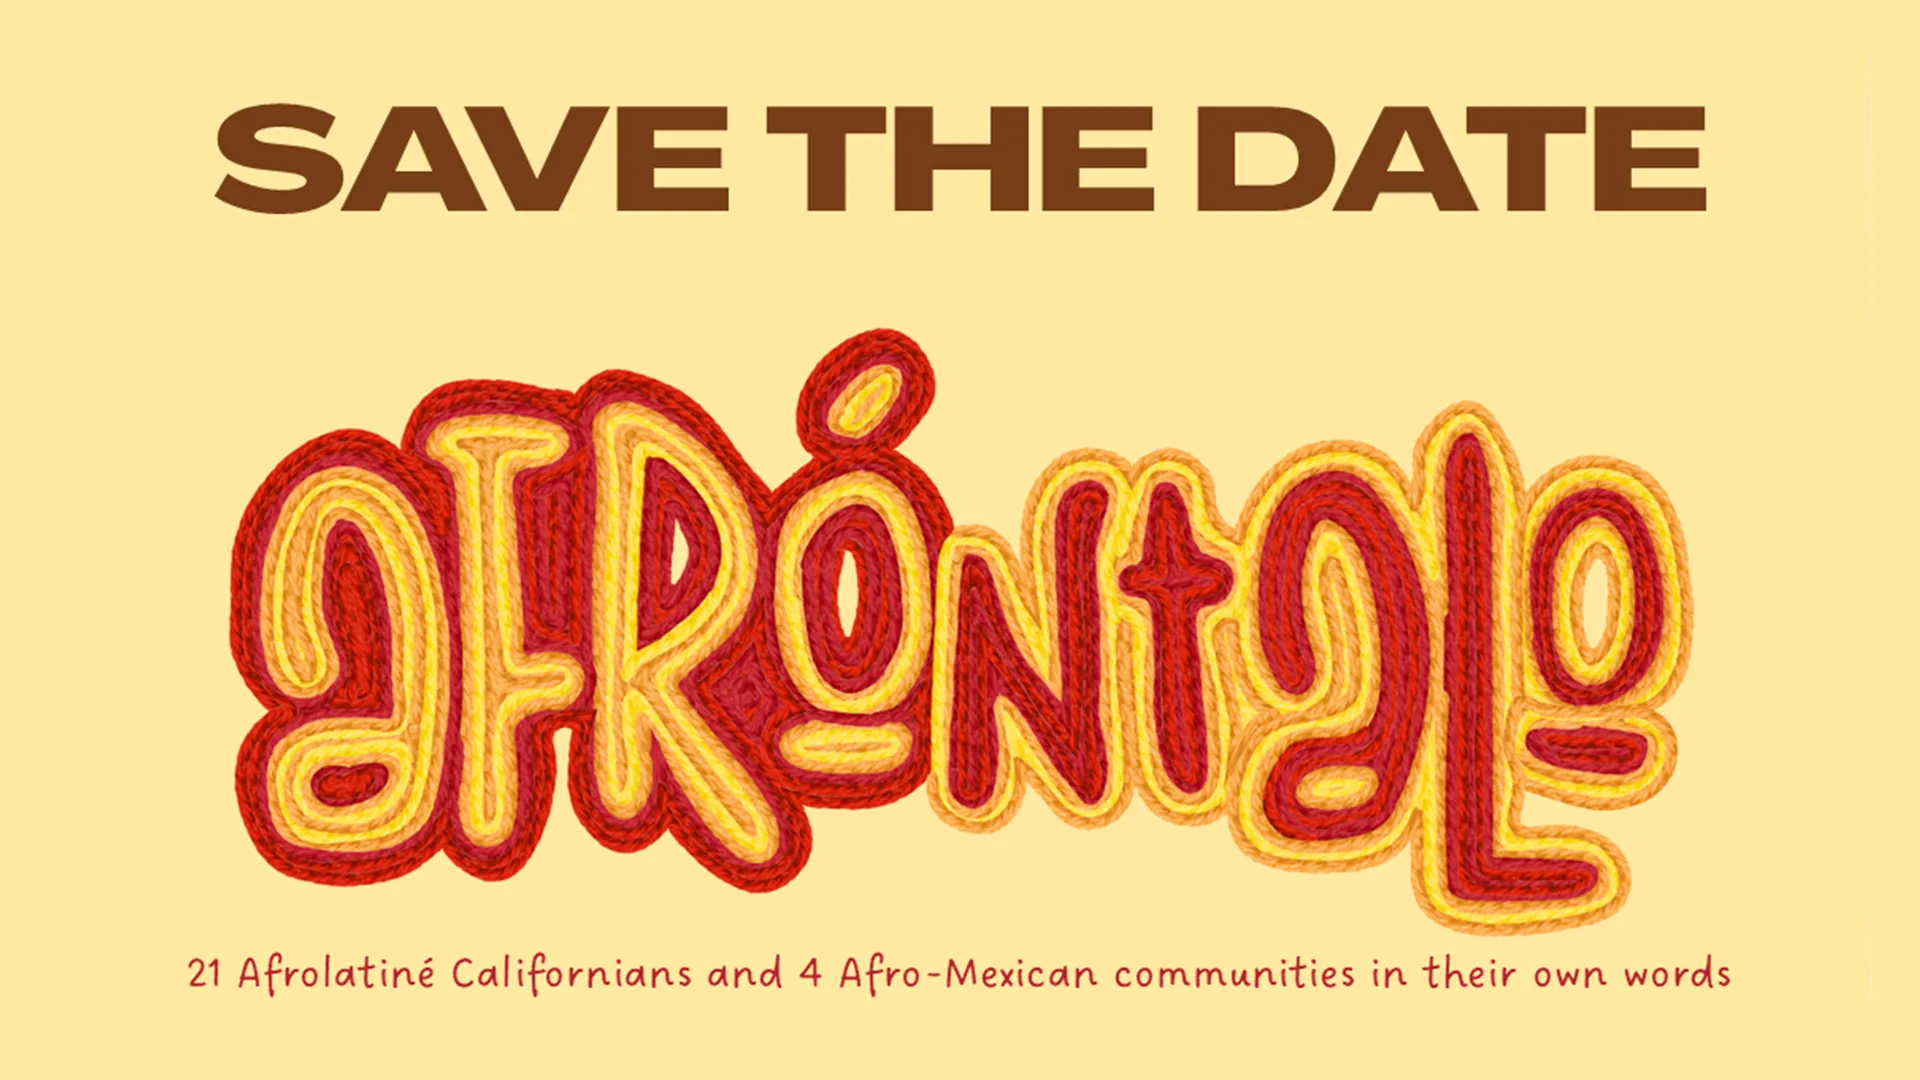 Save the date flyer for Afróntalo.